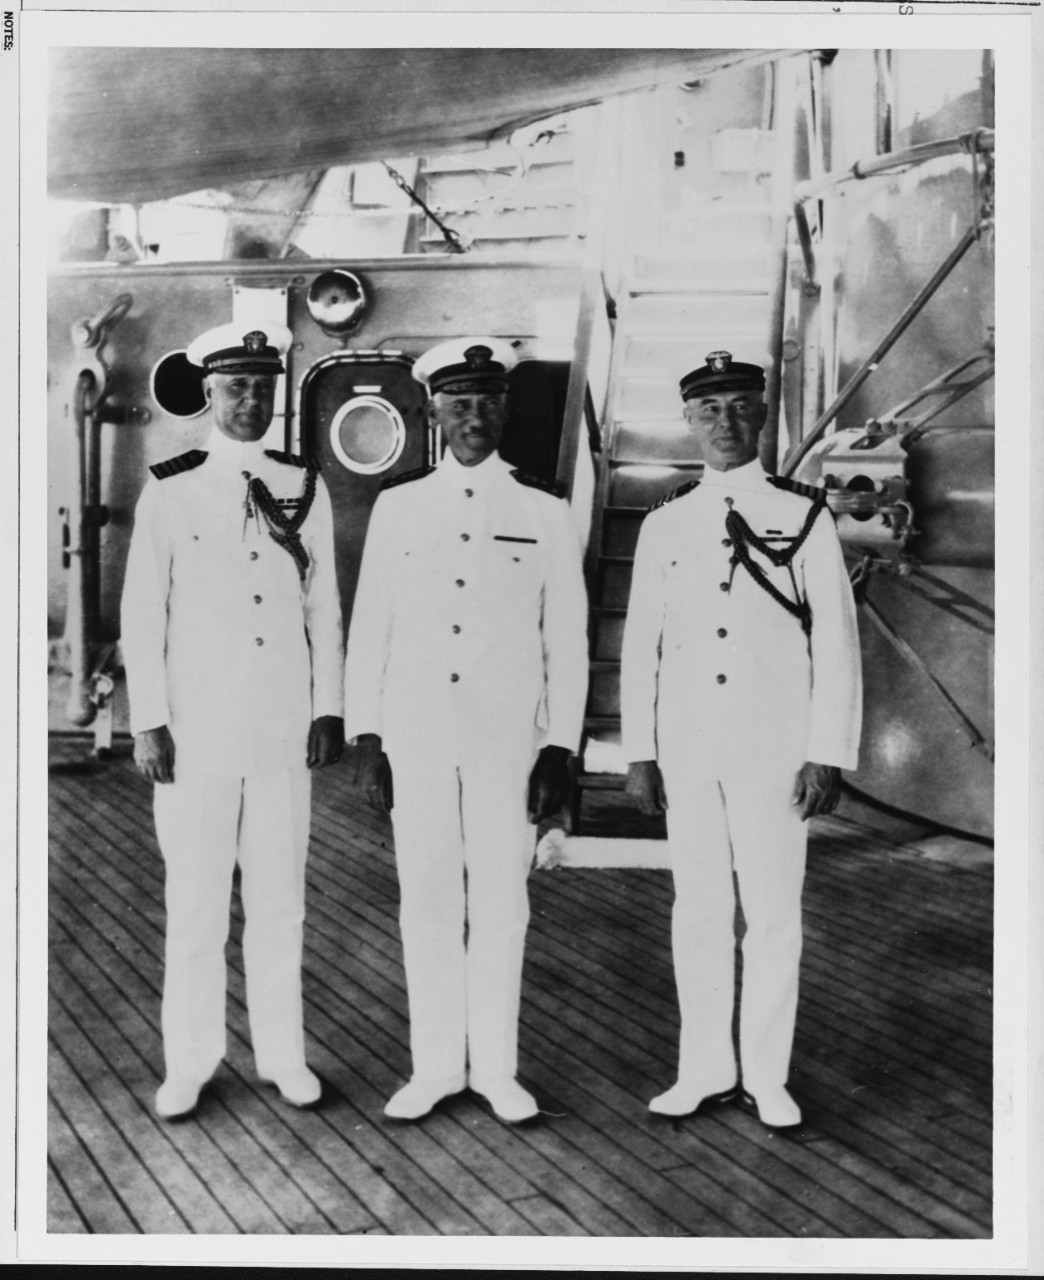 Scouting Fleet, Commander and Aides, circa 1927